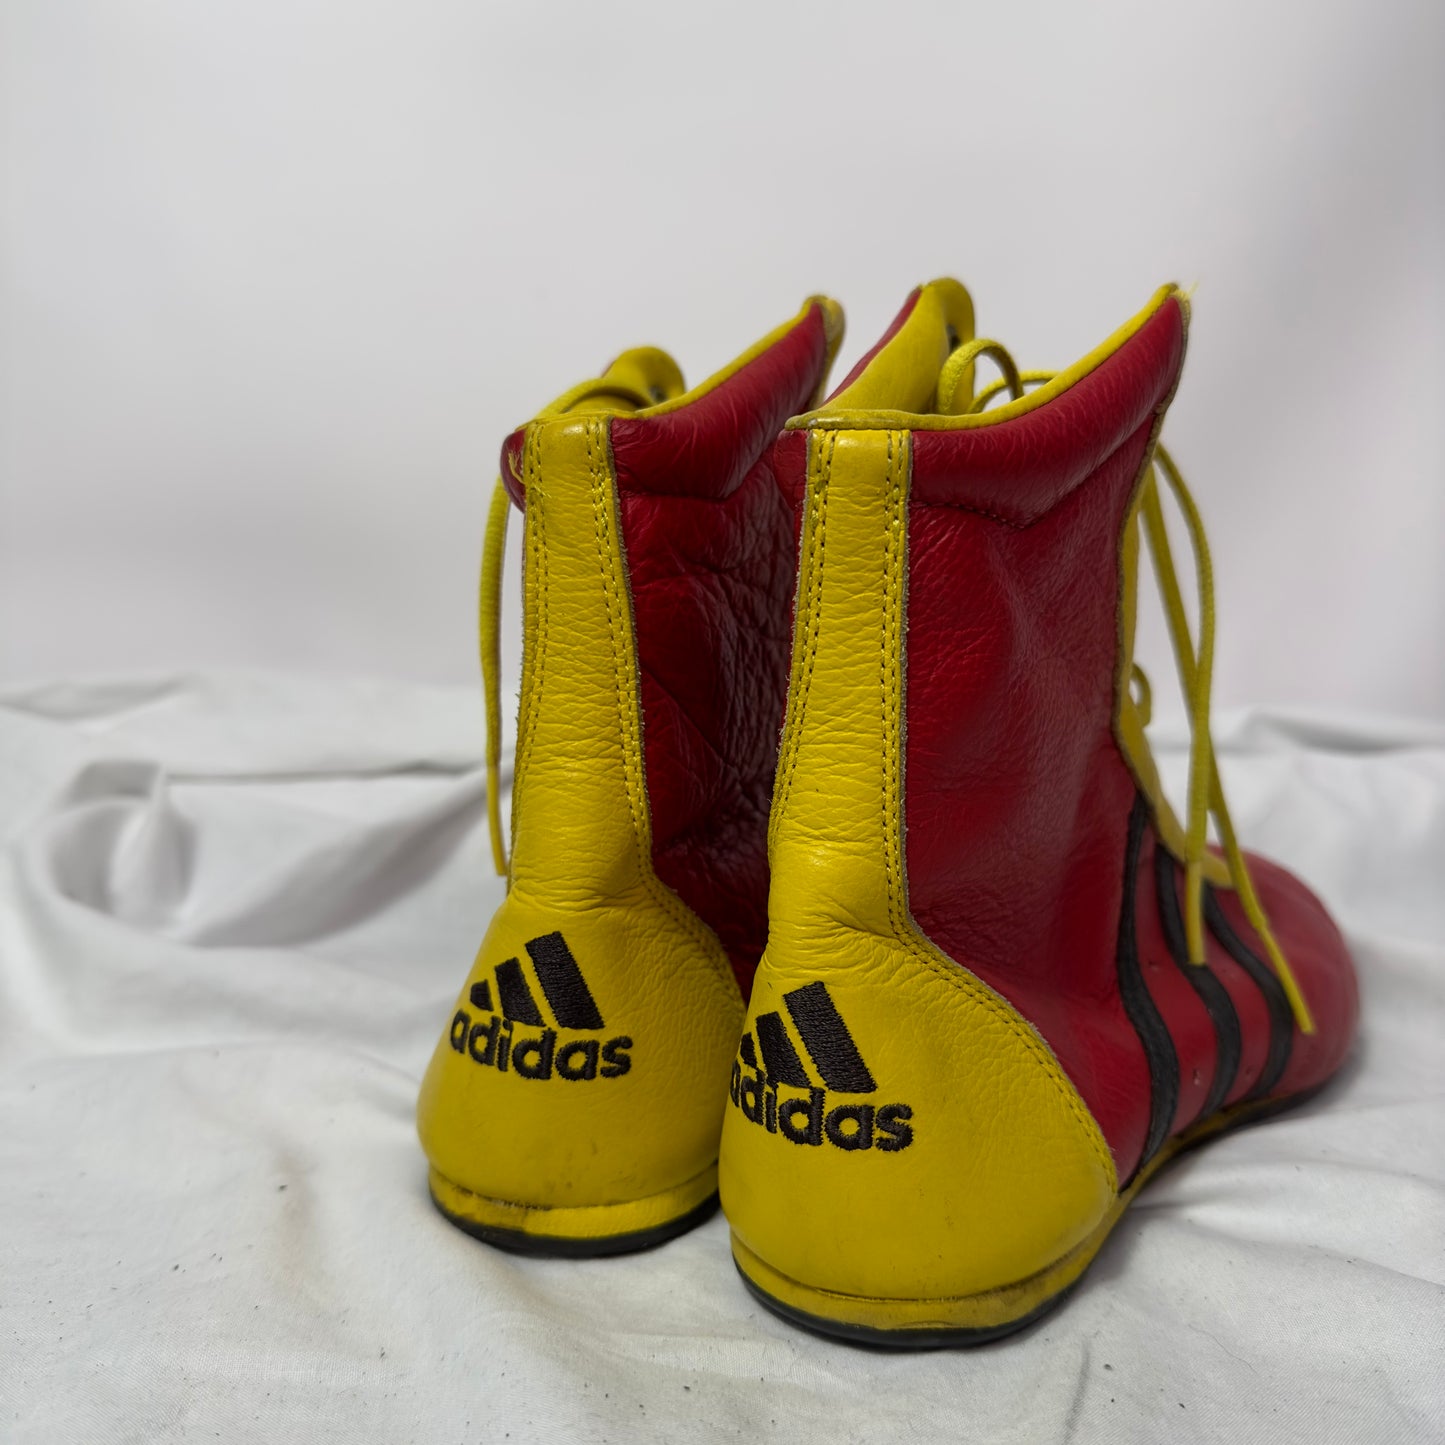 Adidas 2007 Vintage Leather Boxing Boots 39